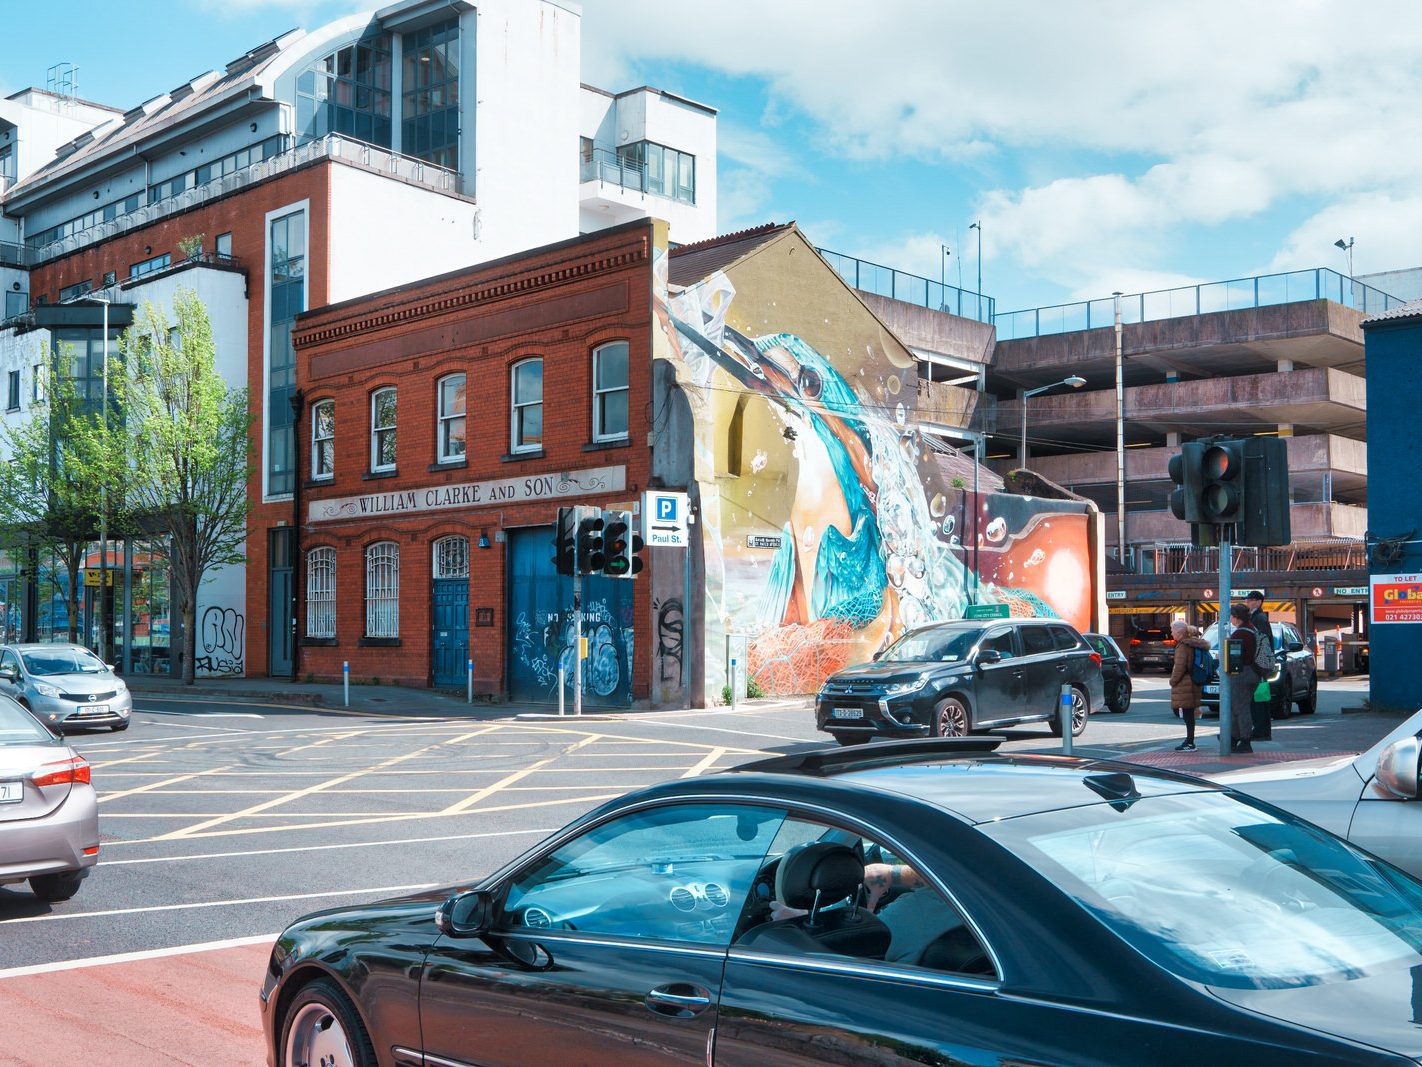 STREET ART AT THE WILLIAM CLARKE AND SON BUILDING [ST PAUL'S AVENUE OFF LAVITT'S QUAY IN CORK] 001